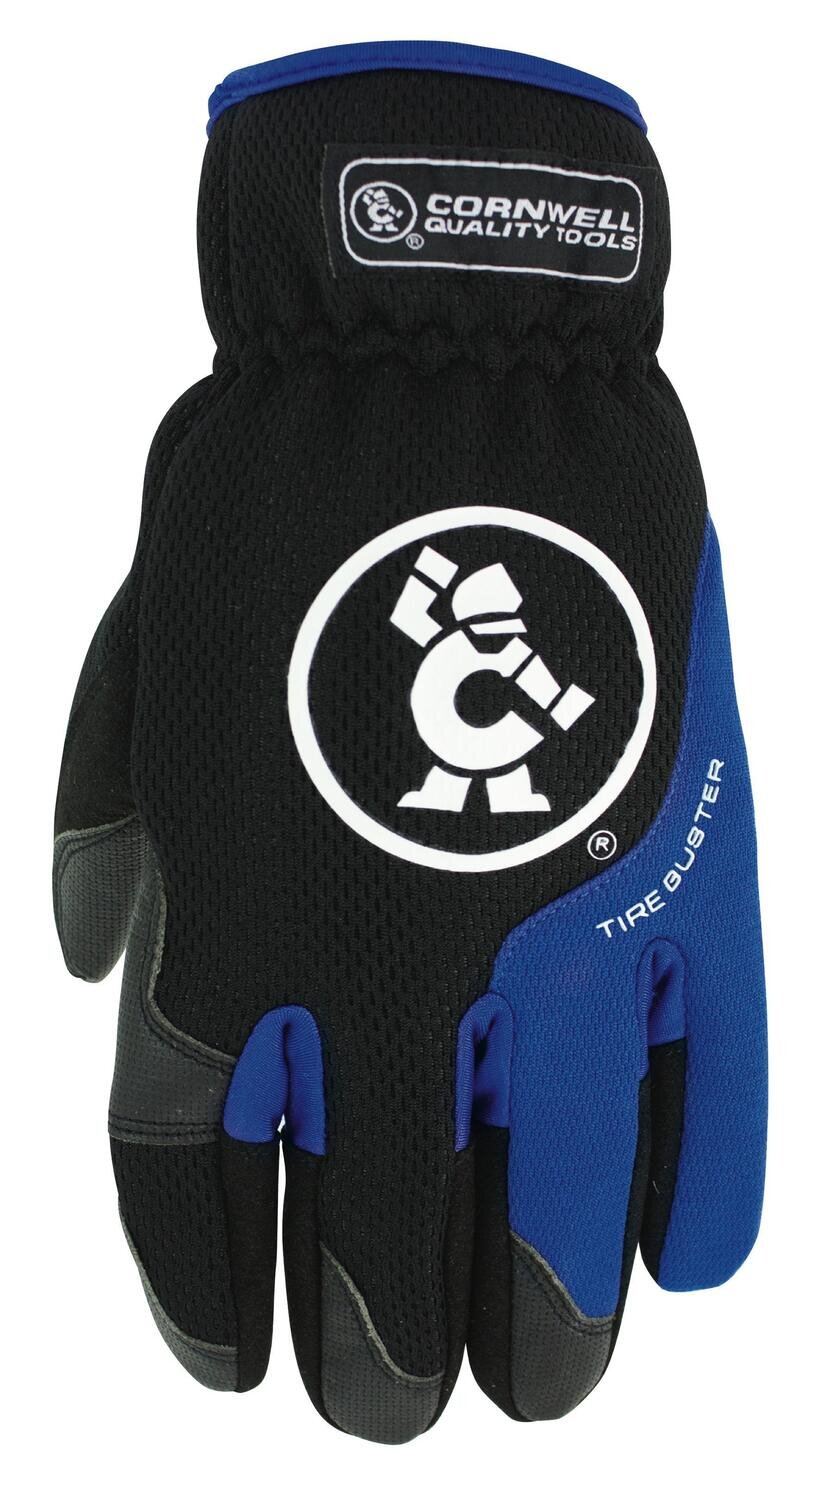 ASCCTBL - Tire Buster Gloves, L